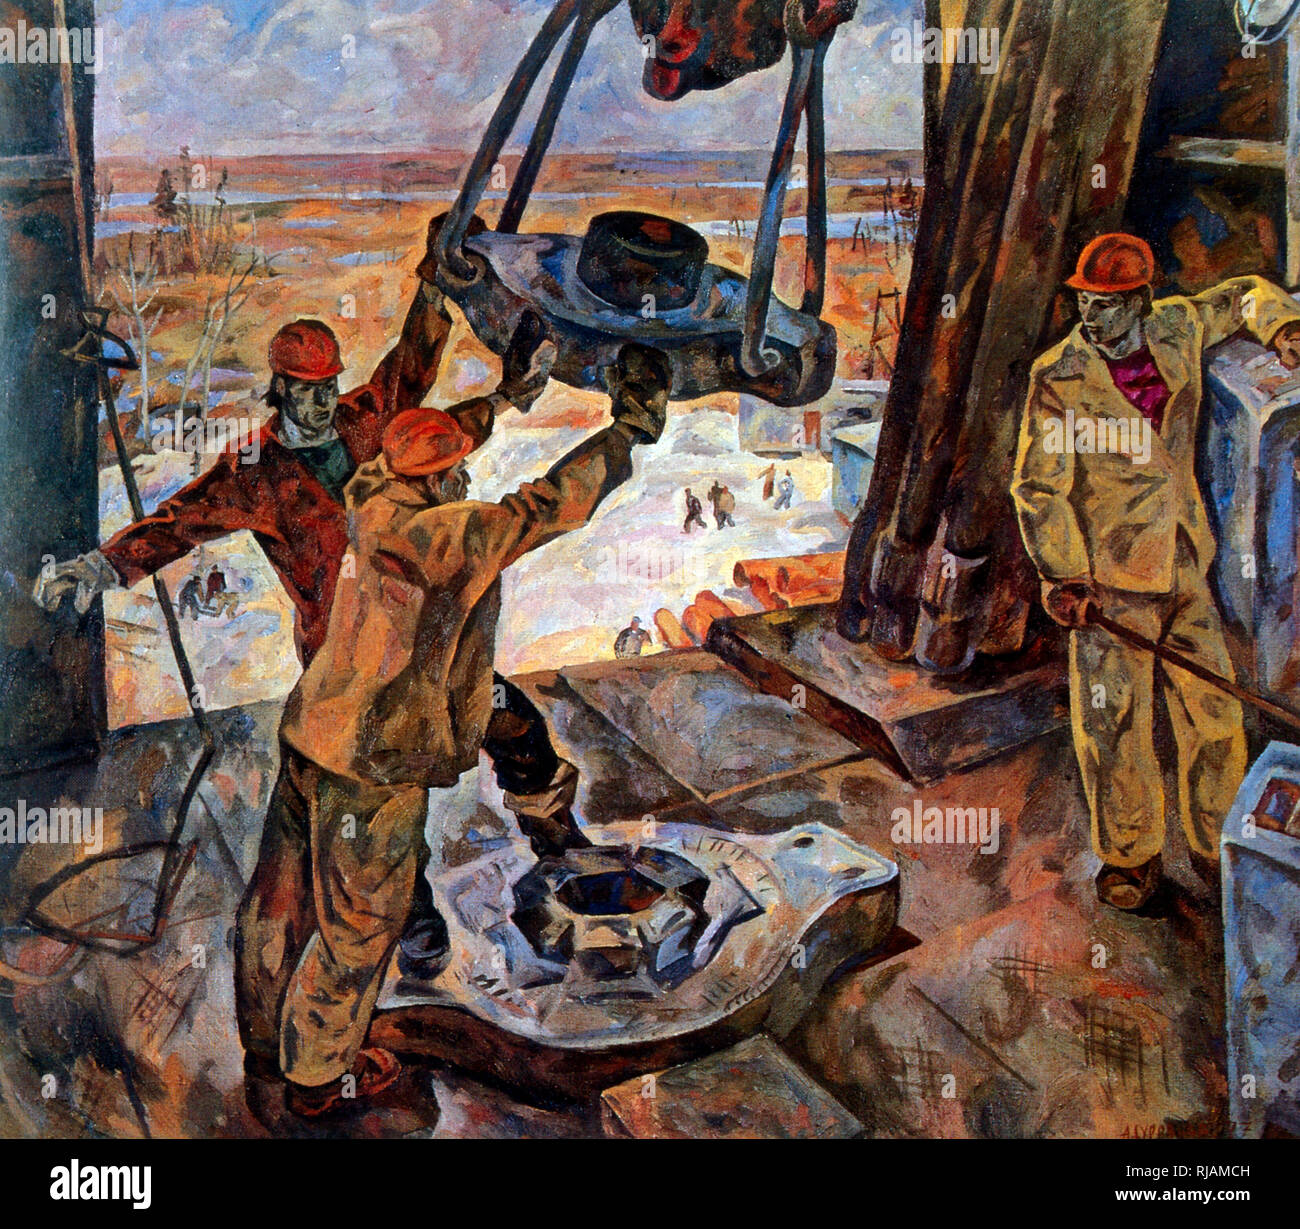 Siberian Petroleum extraction; 1977, by Andrey Petrovich Surovtsev Soviet and later Russian painter, 1931-2006. Stock Photo